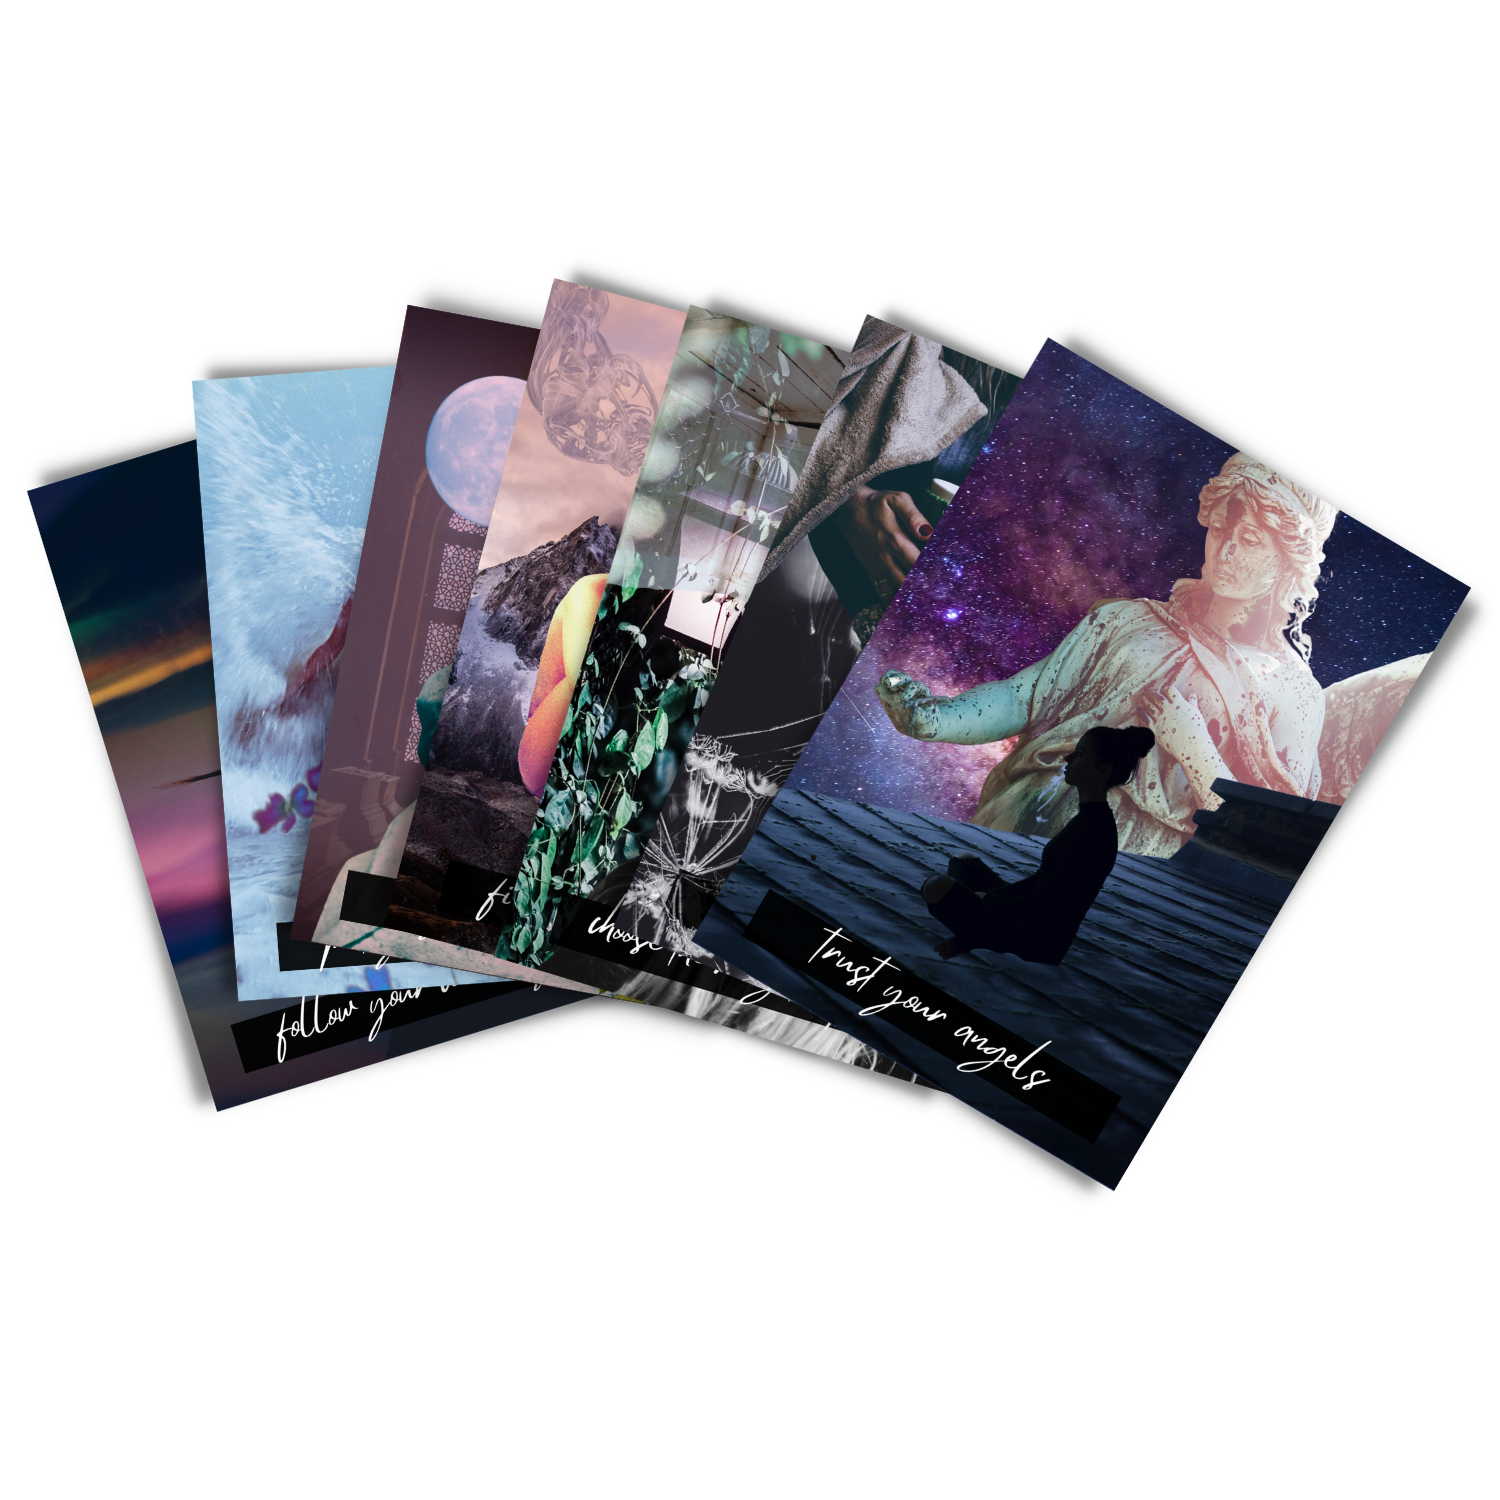 Digital Oracle Cards Created by Tabitha Stitt, The Self-Help Psychic All in a row with beautiful colors